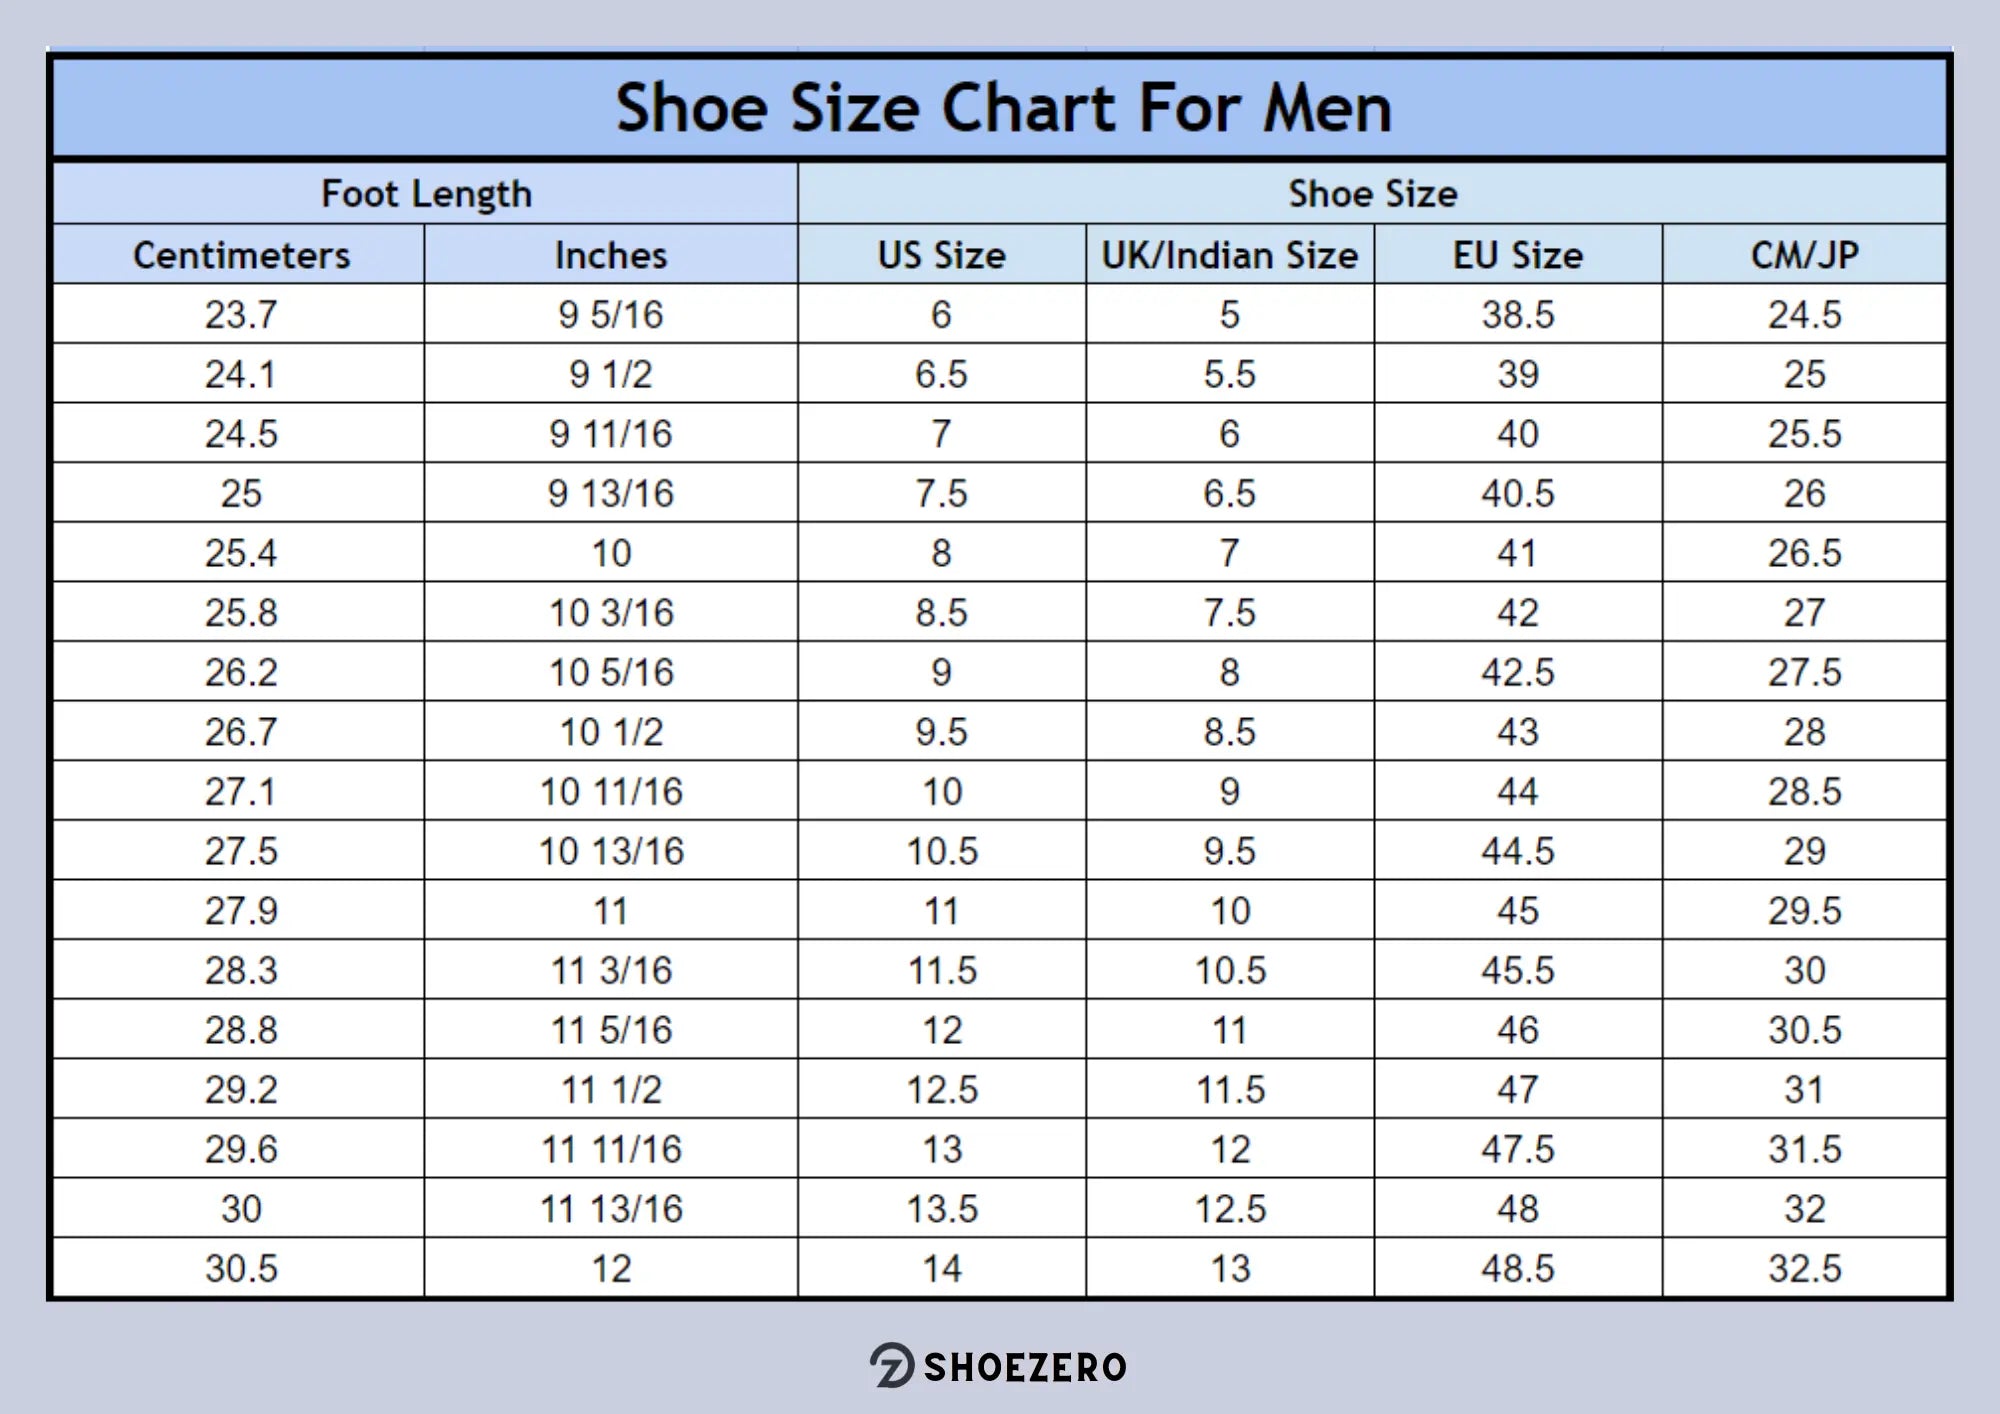 Fitting Guide & Size Charts Available at The Fitting Room